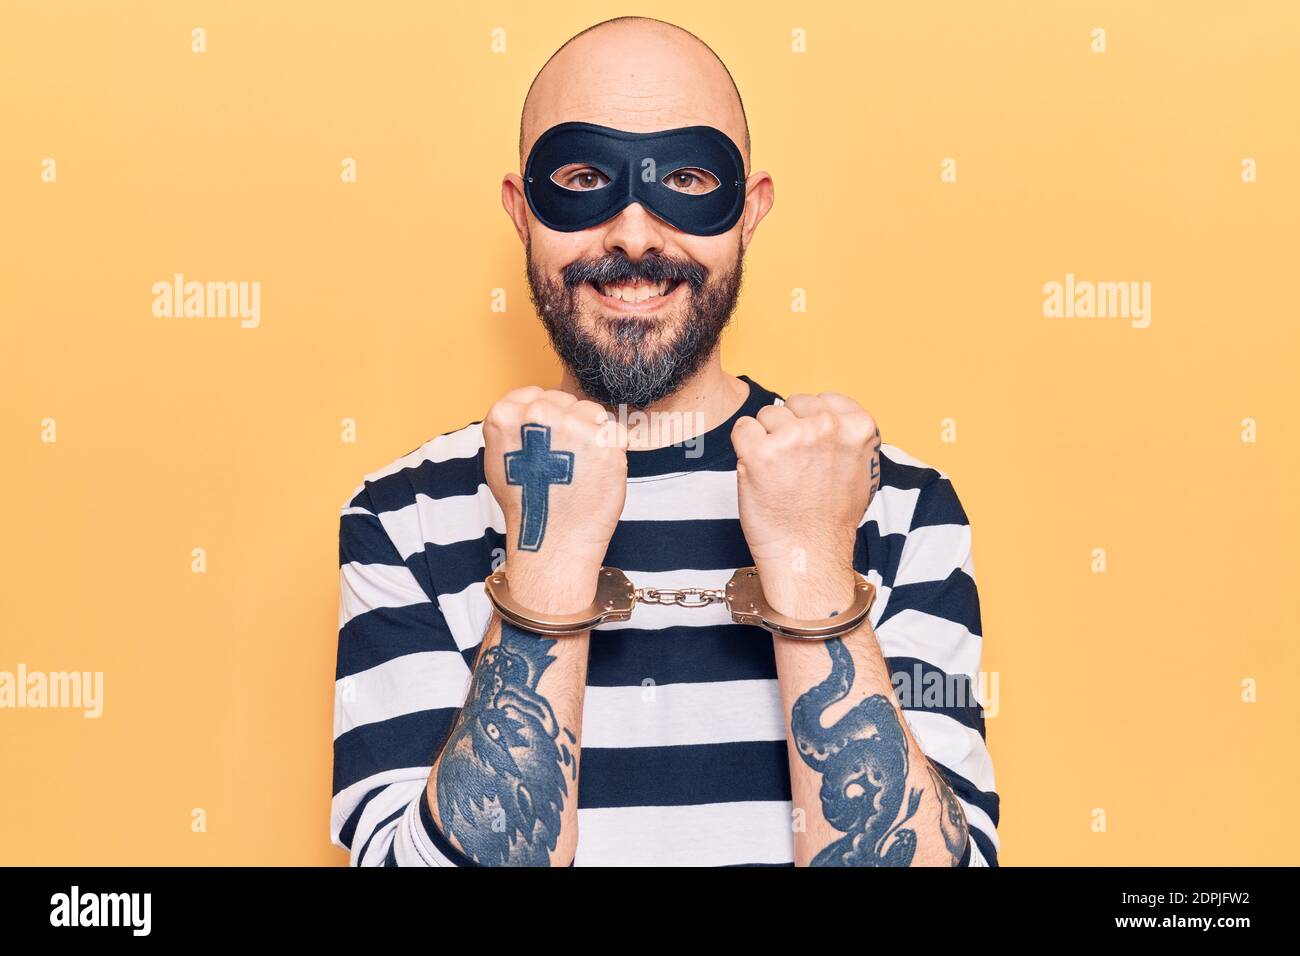 Young handsome man wearing burglar mask and handcuffs looking positive and happy standing and smiling with a confident smile showing teeth Stock Photo